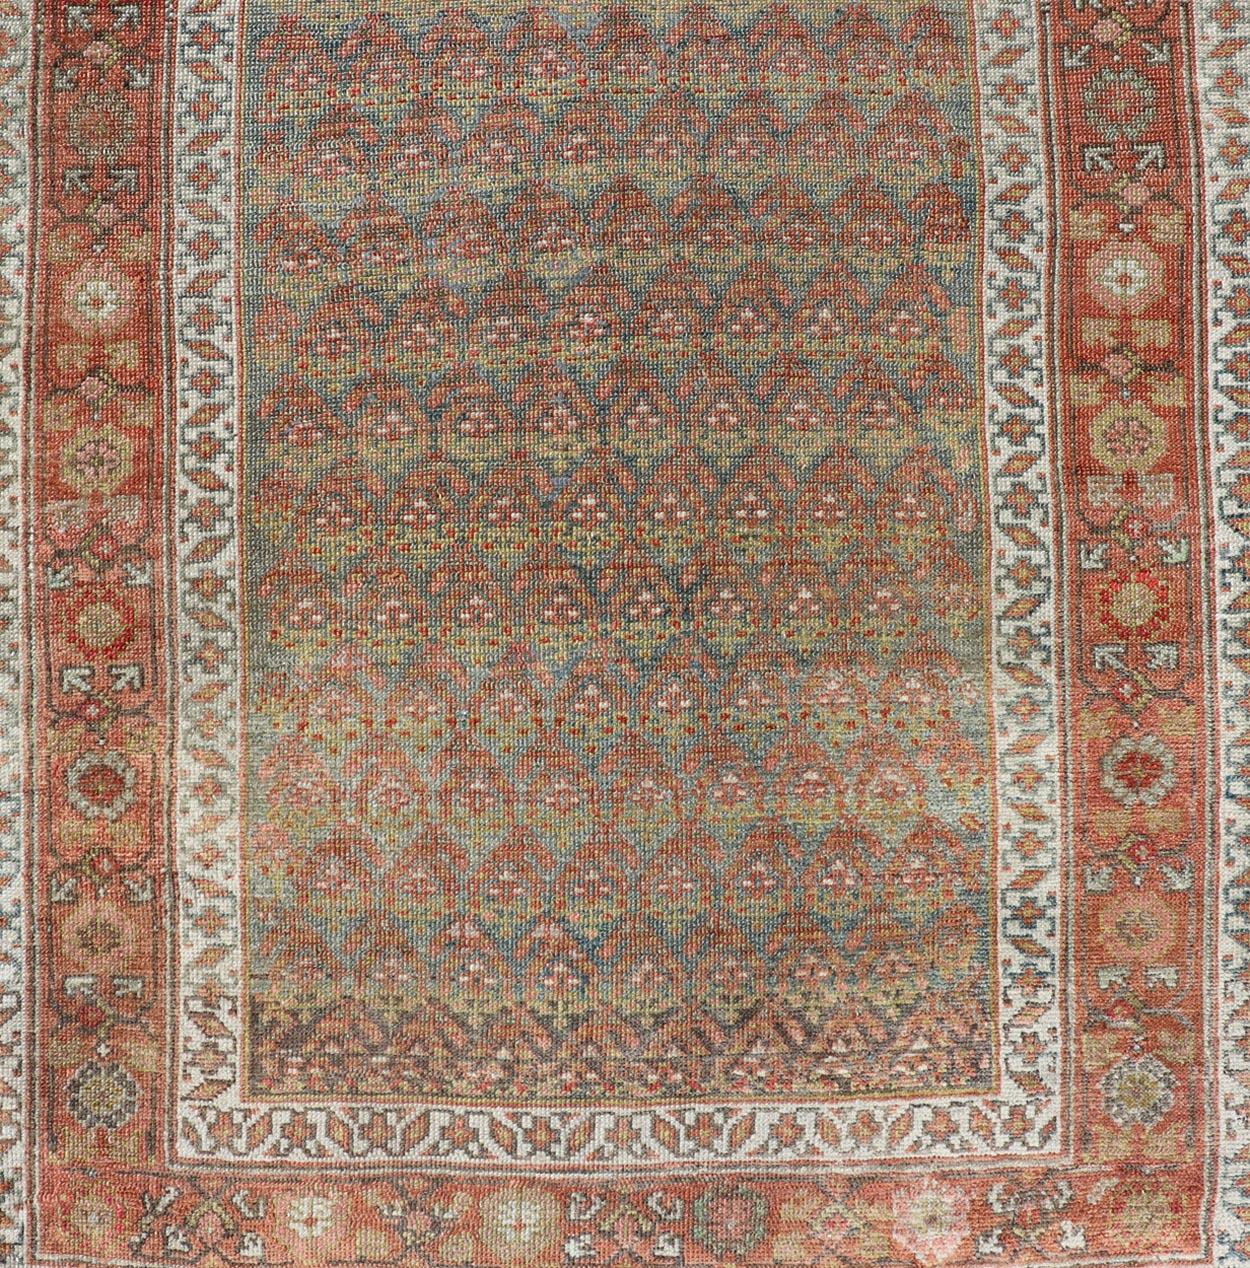 This antique Persian Hamadan rug has been hand-knotted in wool and features an all-over sub-geometric design rendered in red's, pink, green, and shades of blue. A complementary, multi-tiered border encompasses the entirety of the piece; making it a